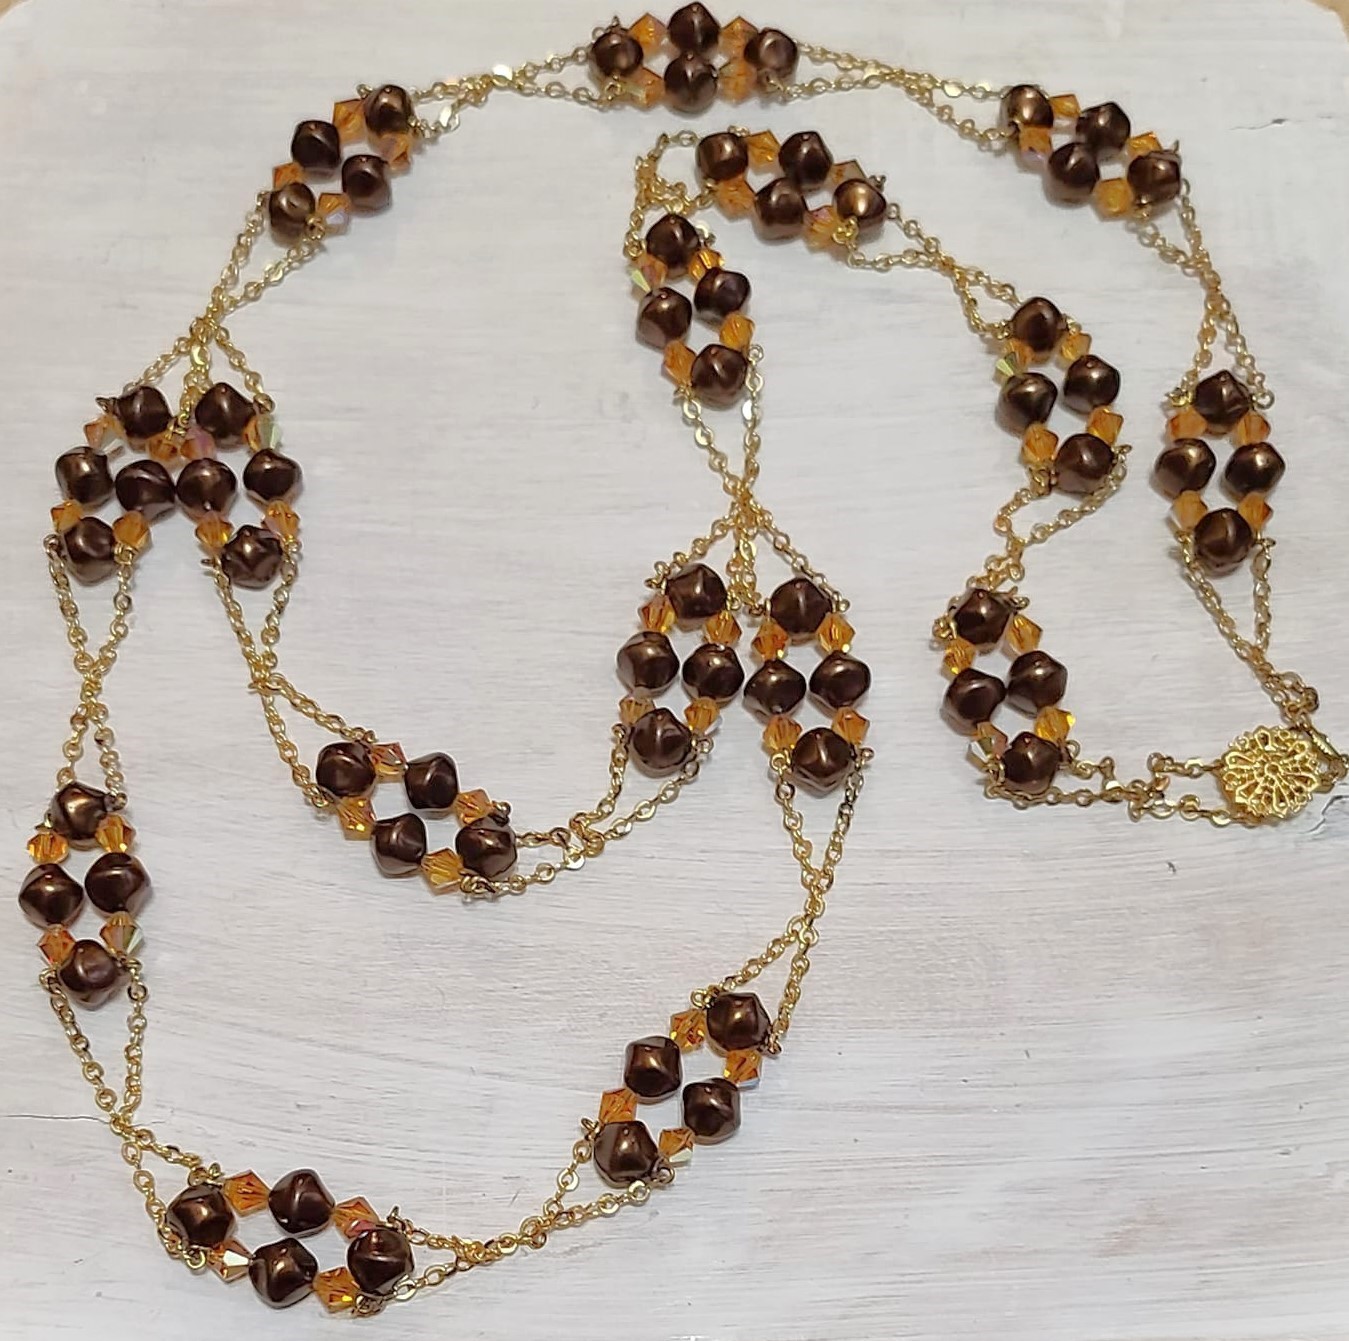 Czech Glass Long Necklace in Brown Tones